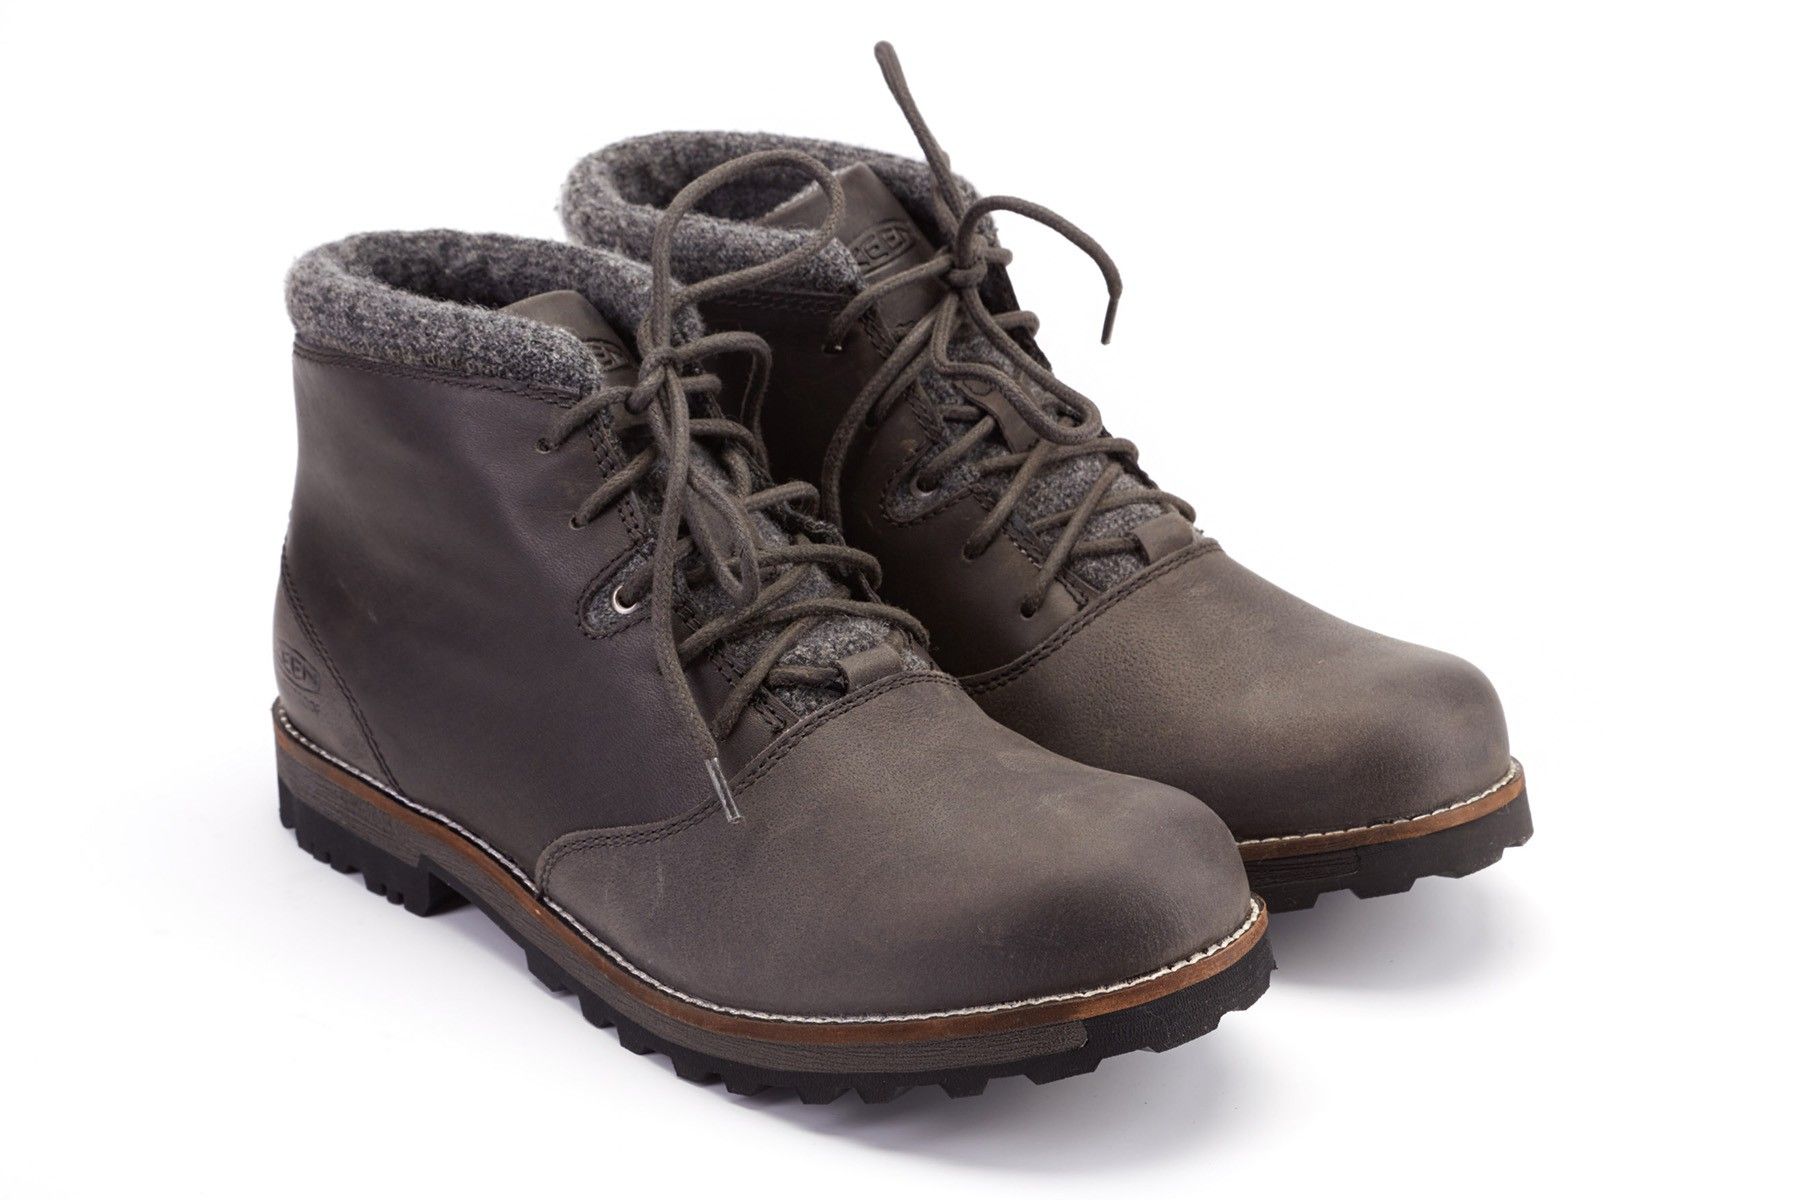 Keen men's Lace Up Boots The Slater WP Bock | APIA